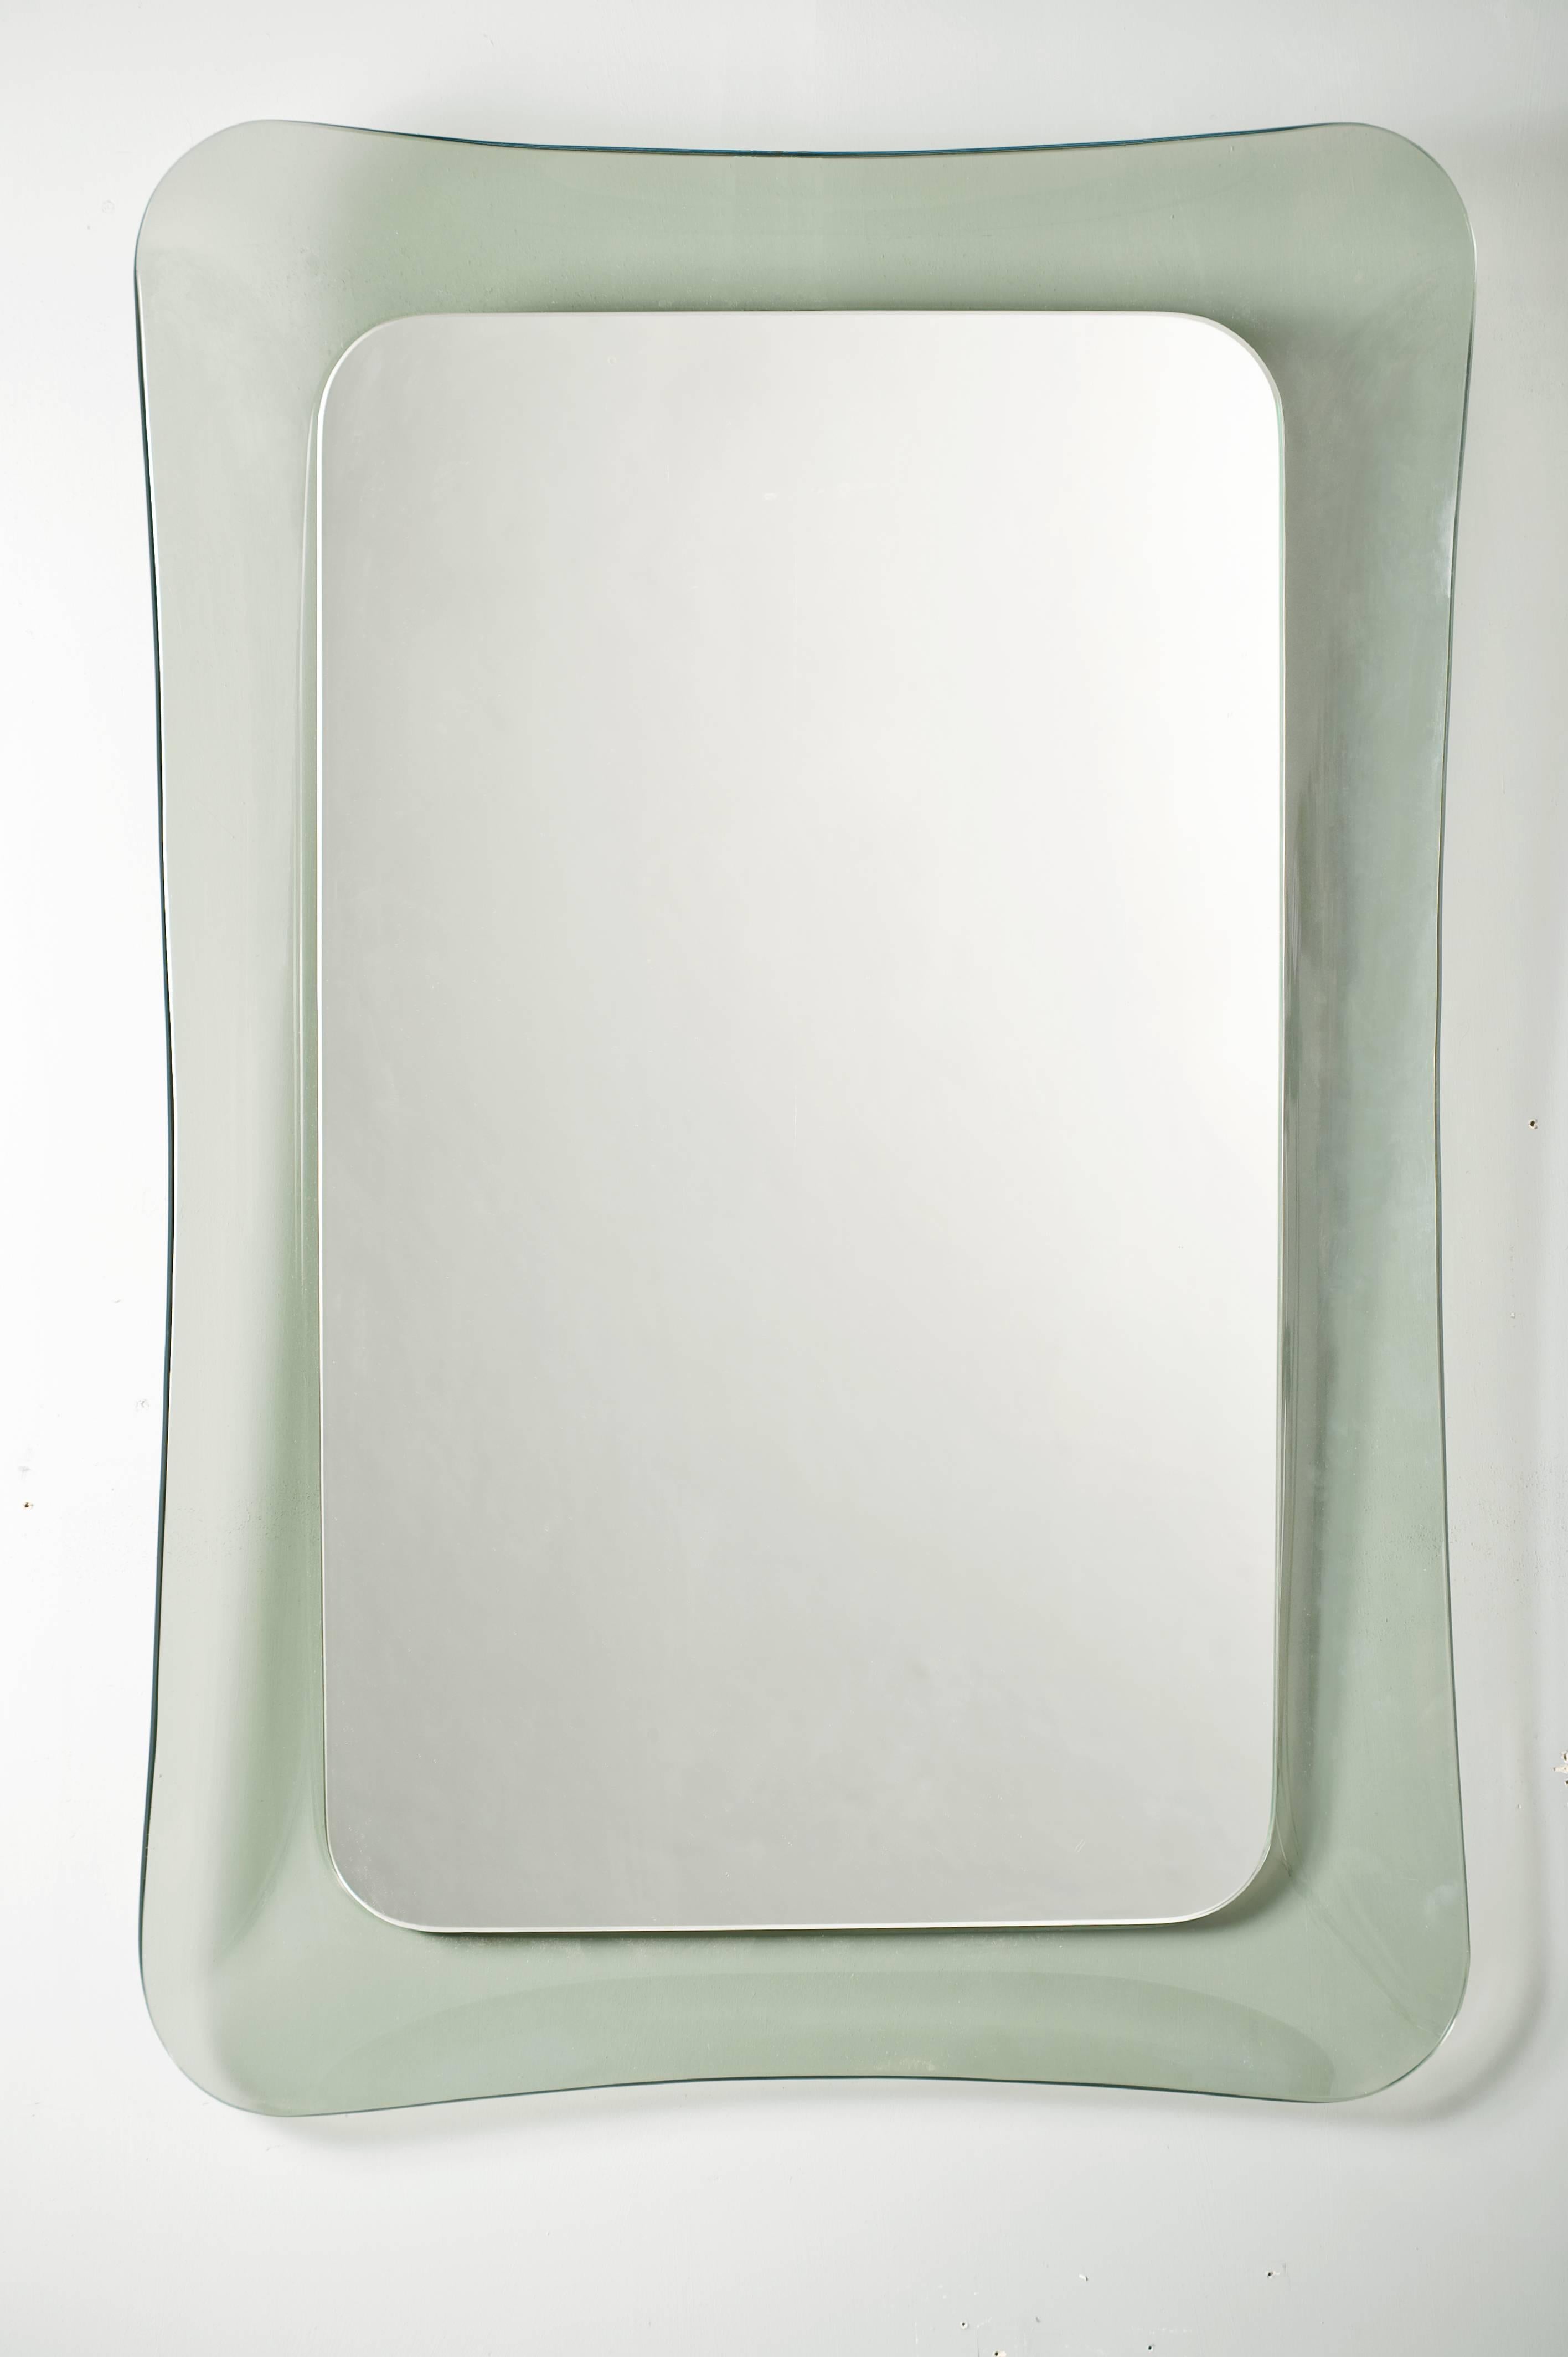 Extraordinary wall mirror with very elegant shape.
Concave light green glass frame.